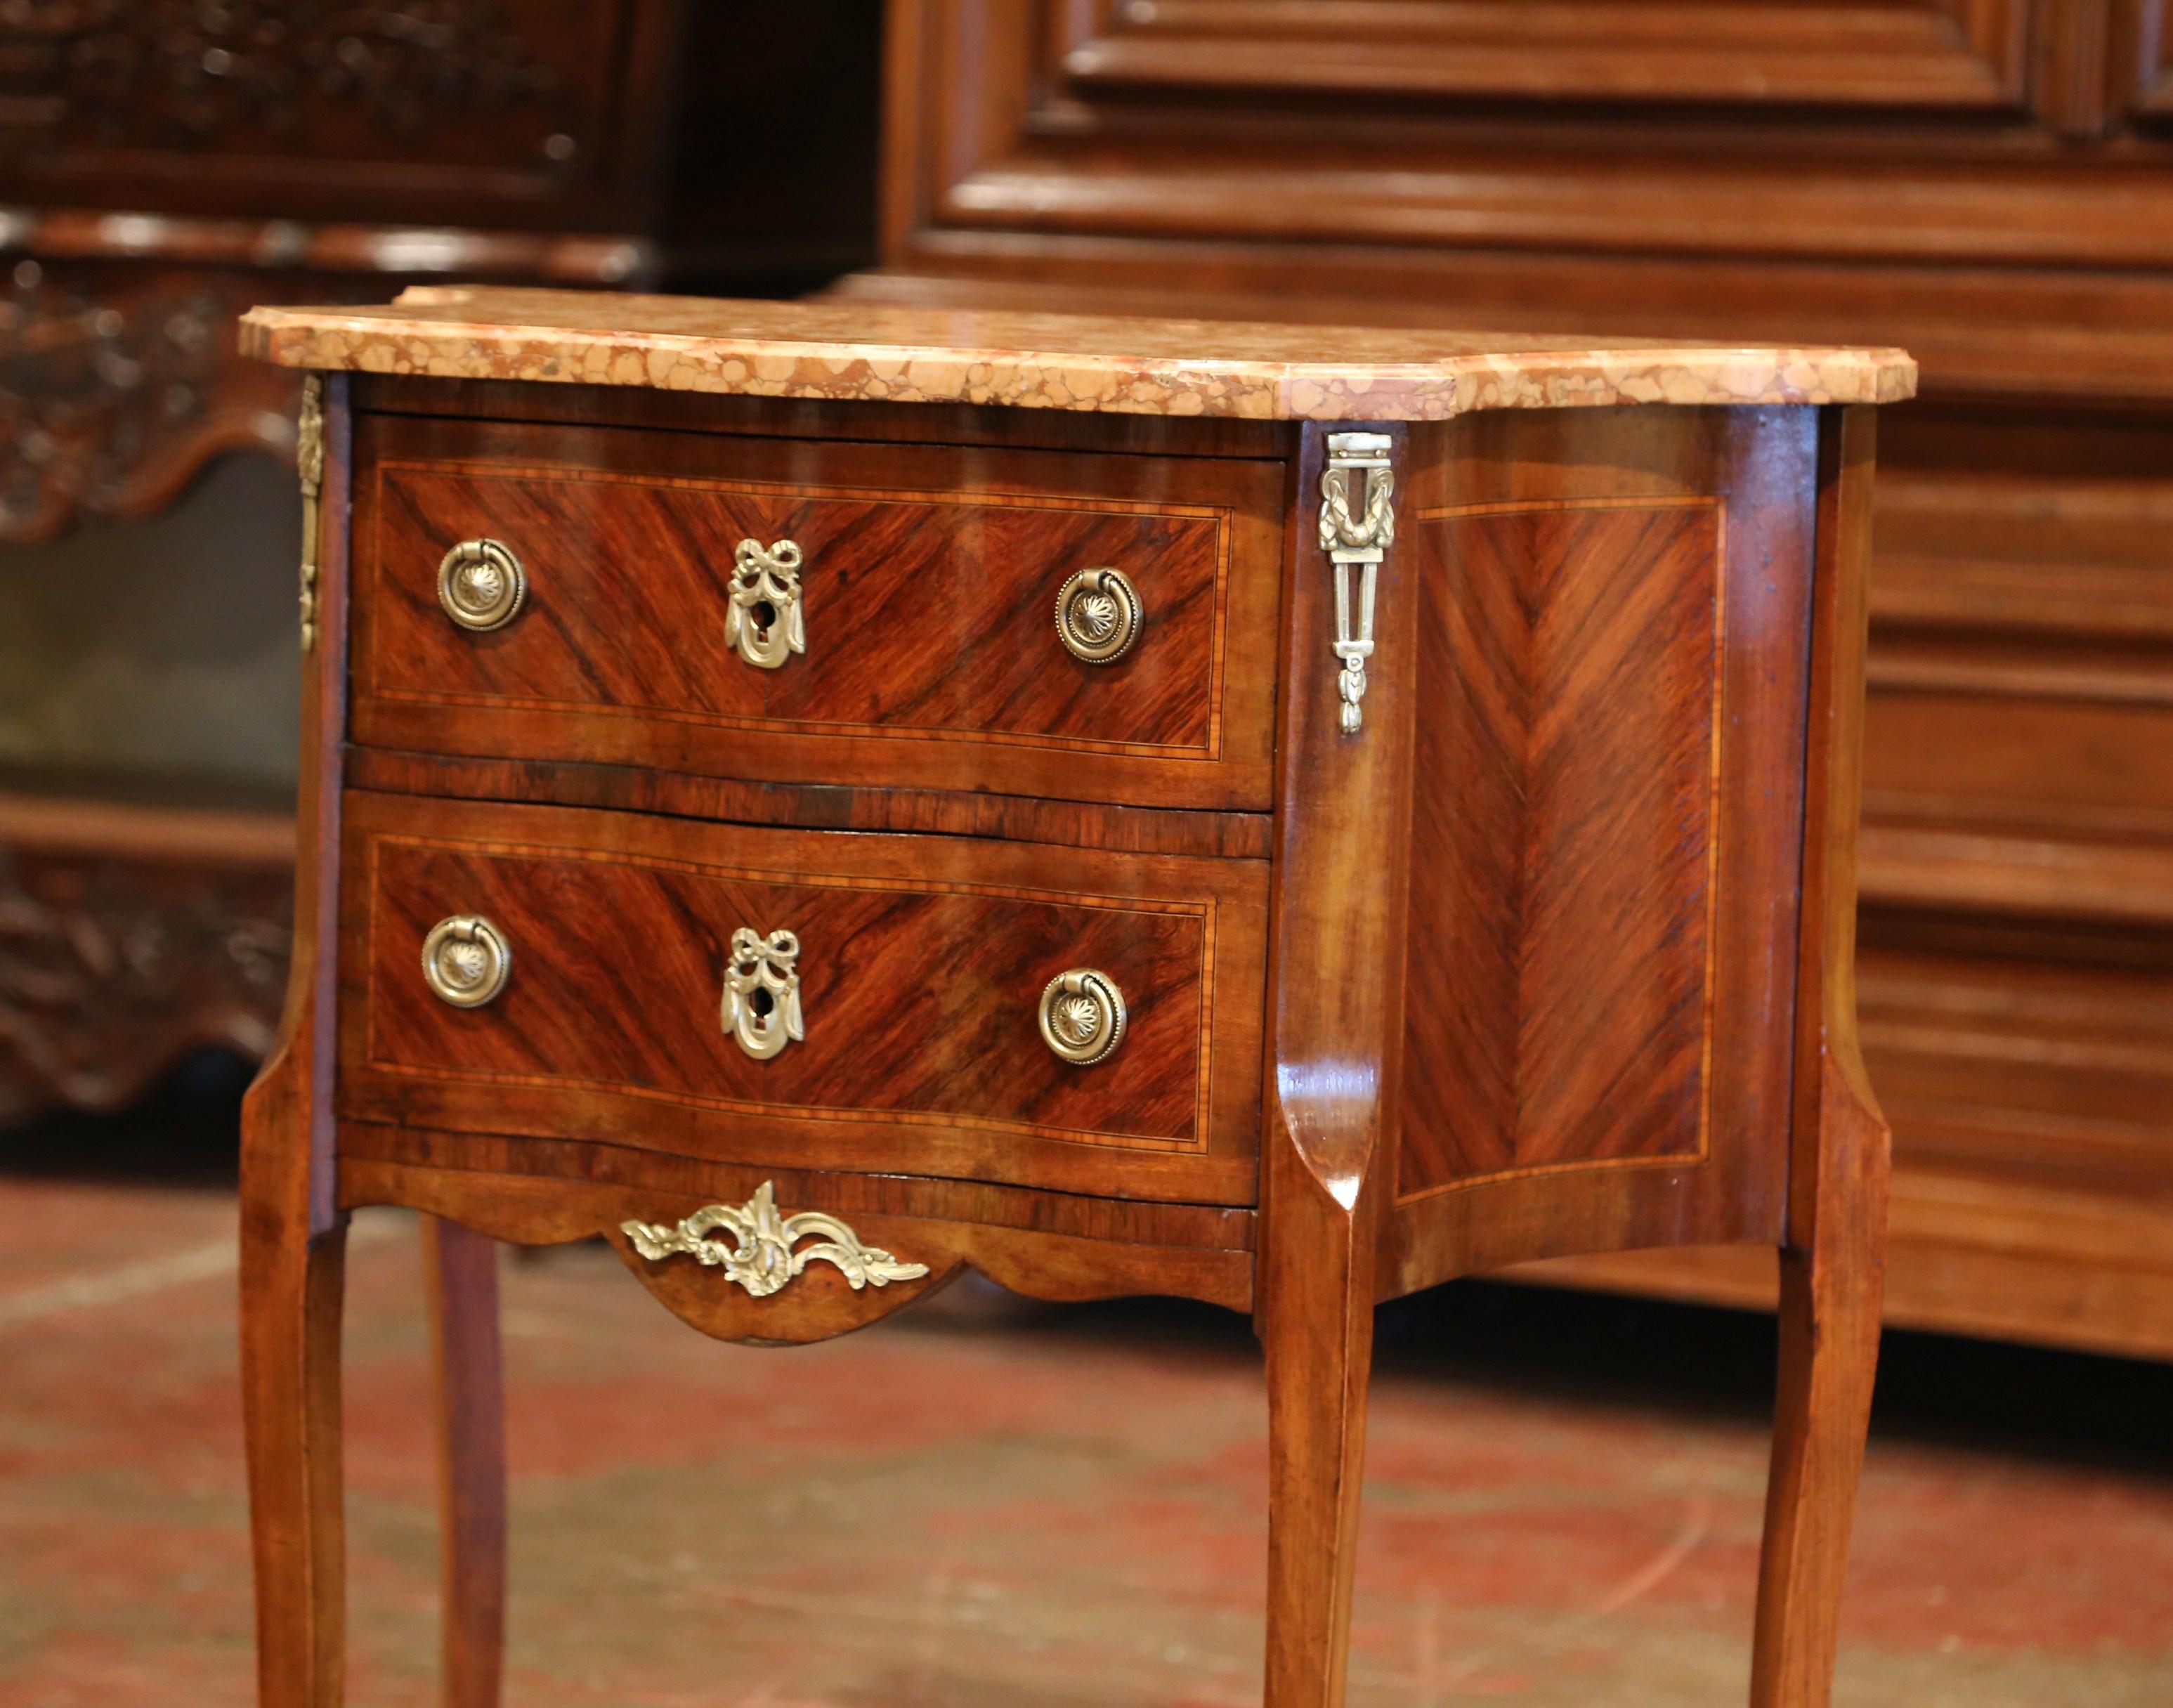 Decorate an living room with this elegant antique chest. Crafted in France circa 1890, the cabinet sits on cabriole legs decorated with bronze caps over the feet. The rosewood commode features two serpentine drawers across the front with inlay and